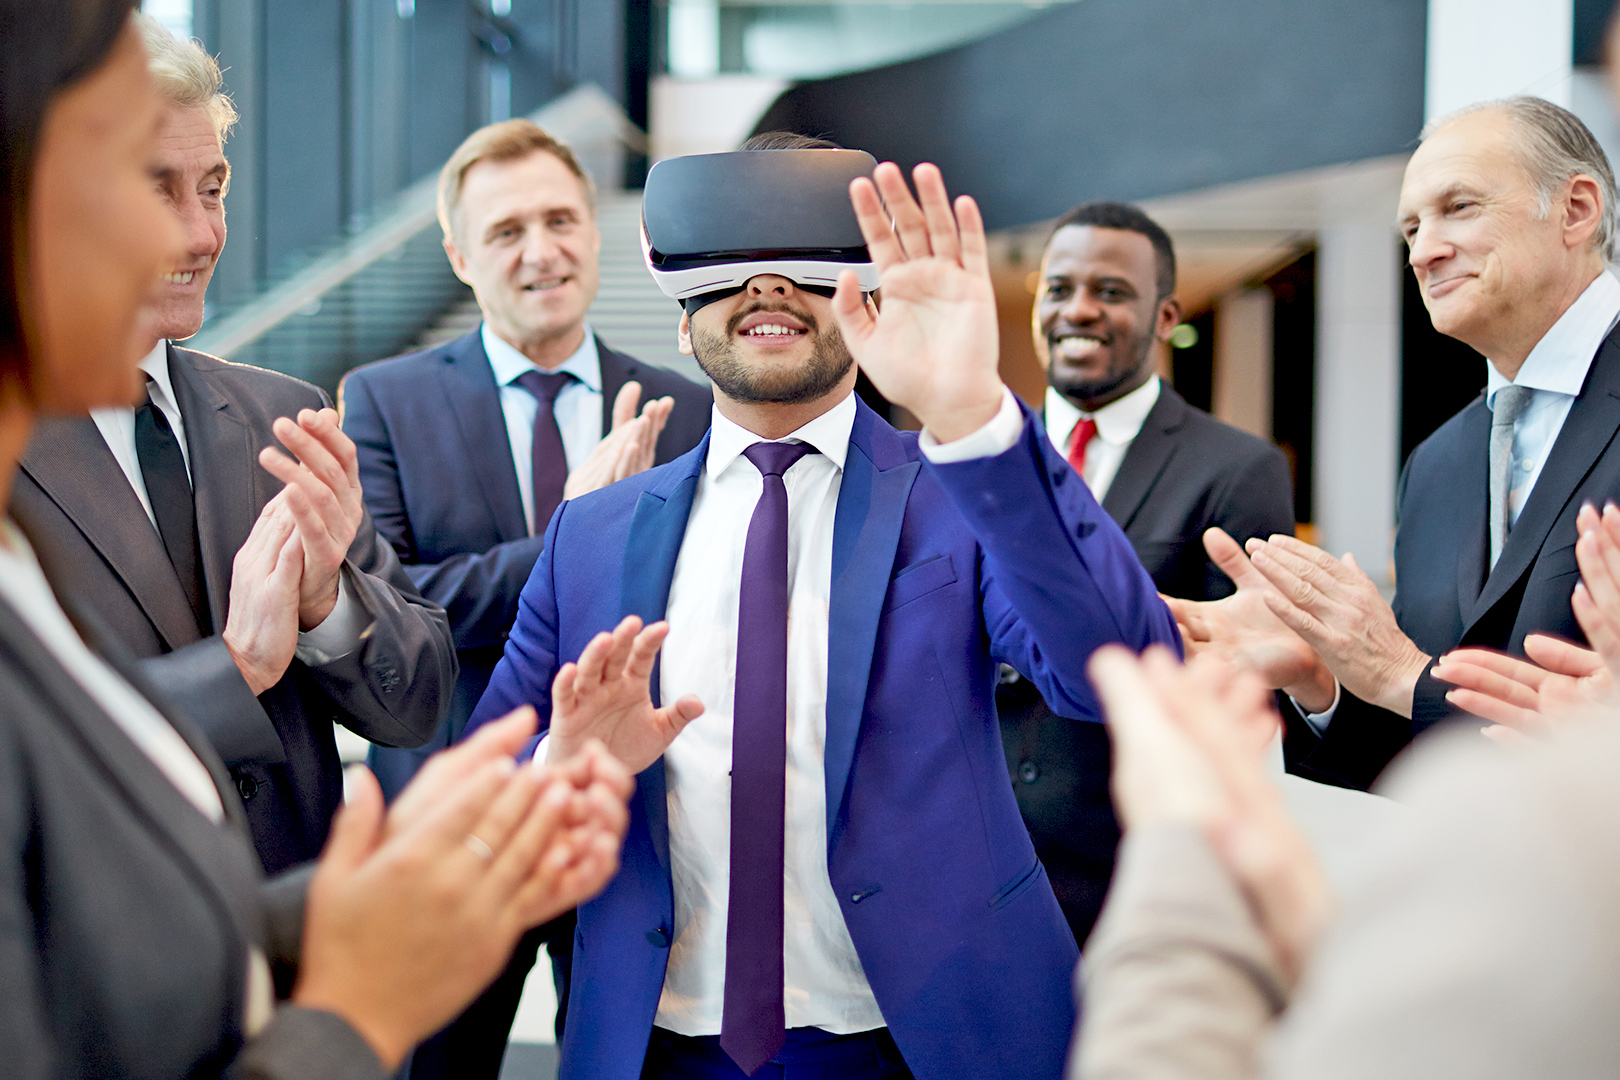 Man with virtual reality headset with other people in suits around him clapping